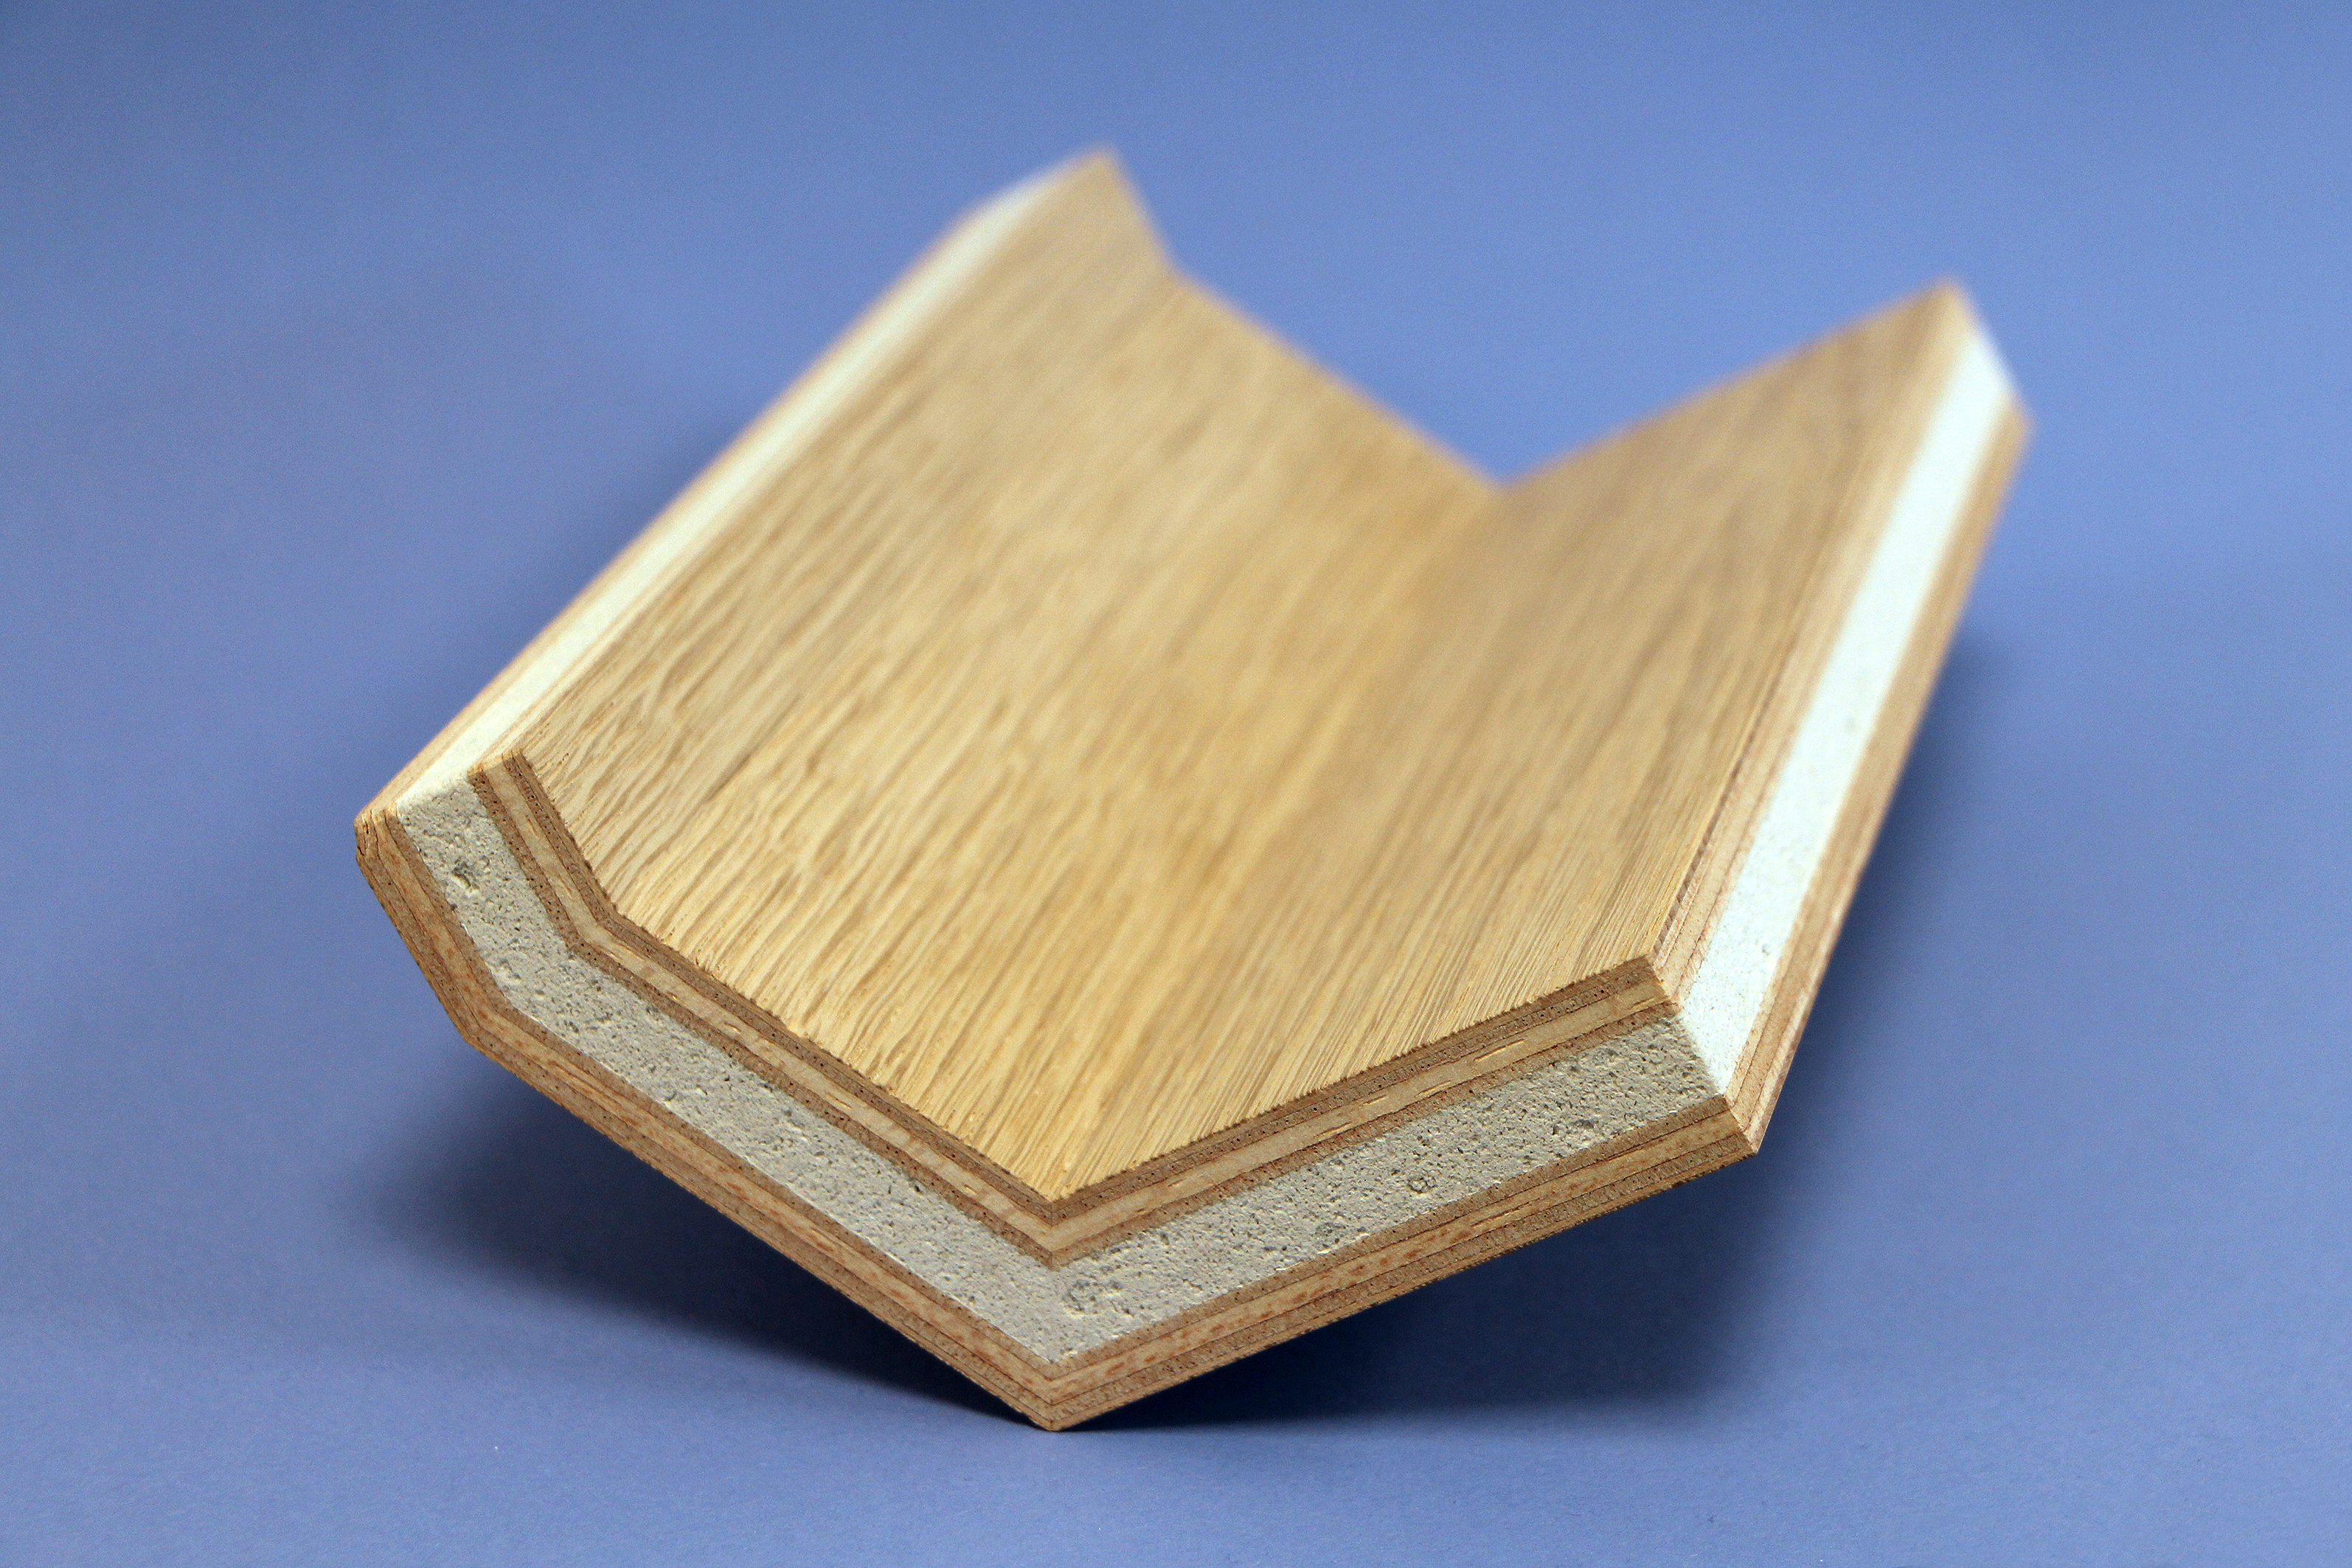 A small molded part can be seen. The hybrid plywood panel is double-angled; the foam glass core is continuous.